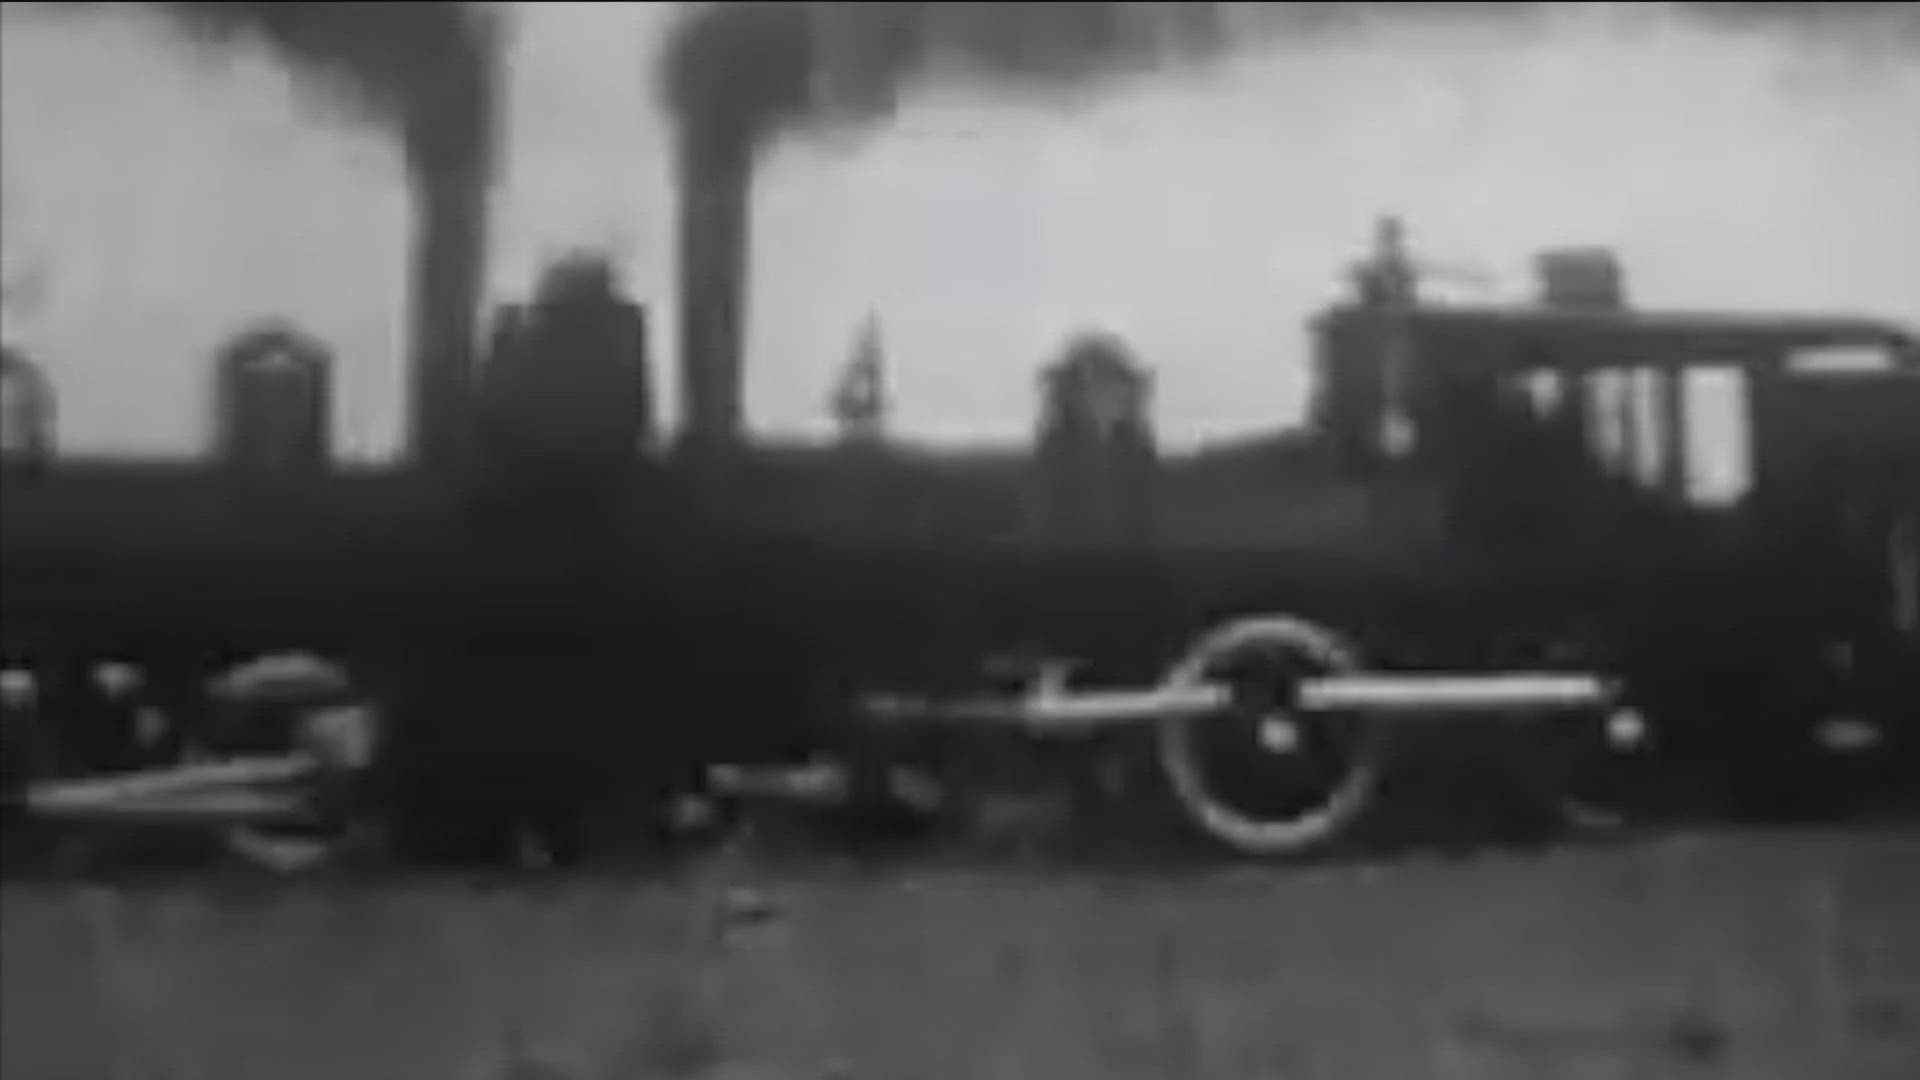 It may seem hard to believe, but around 100 years ago, many Americans got their entertainment from watching two steam engines crash into each other, head-on.